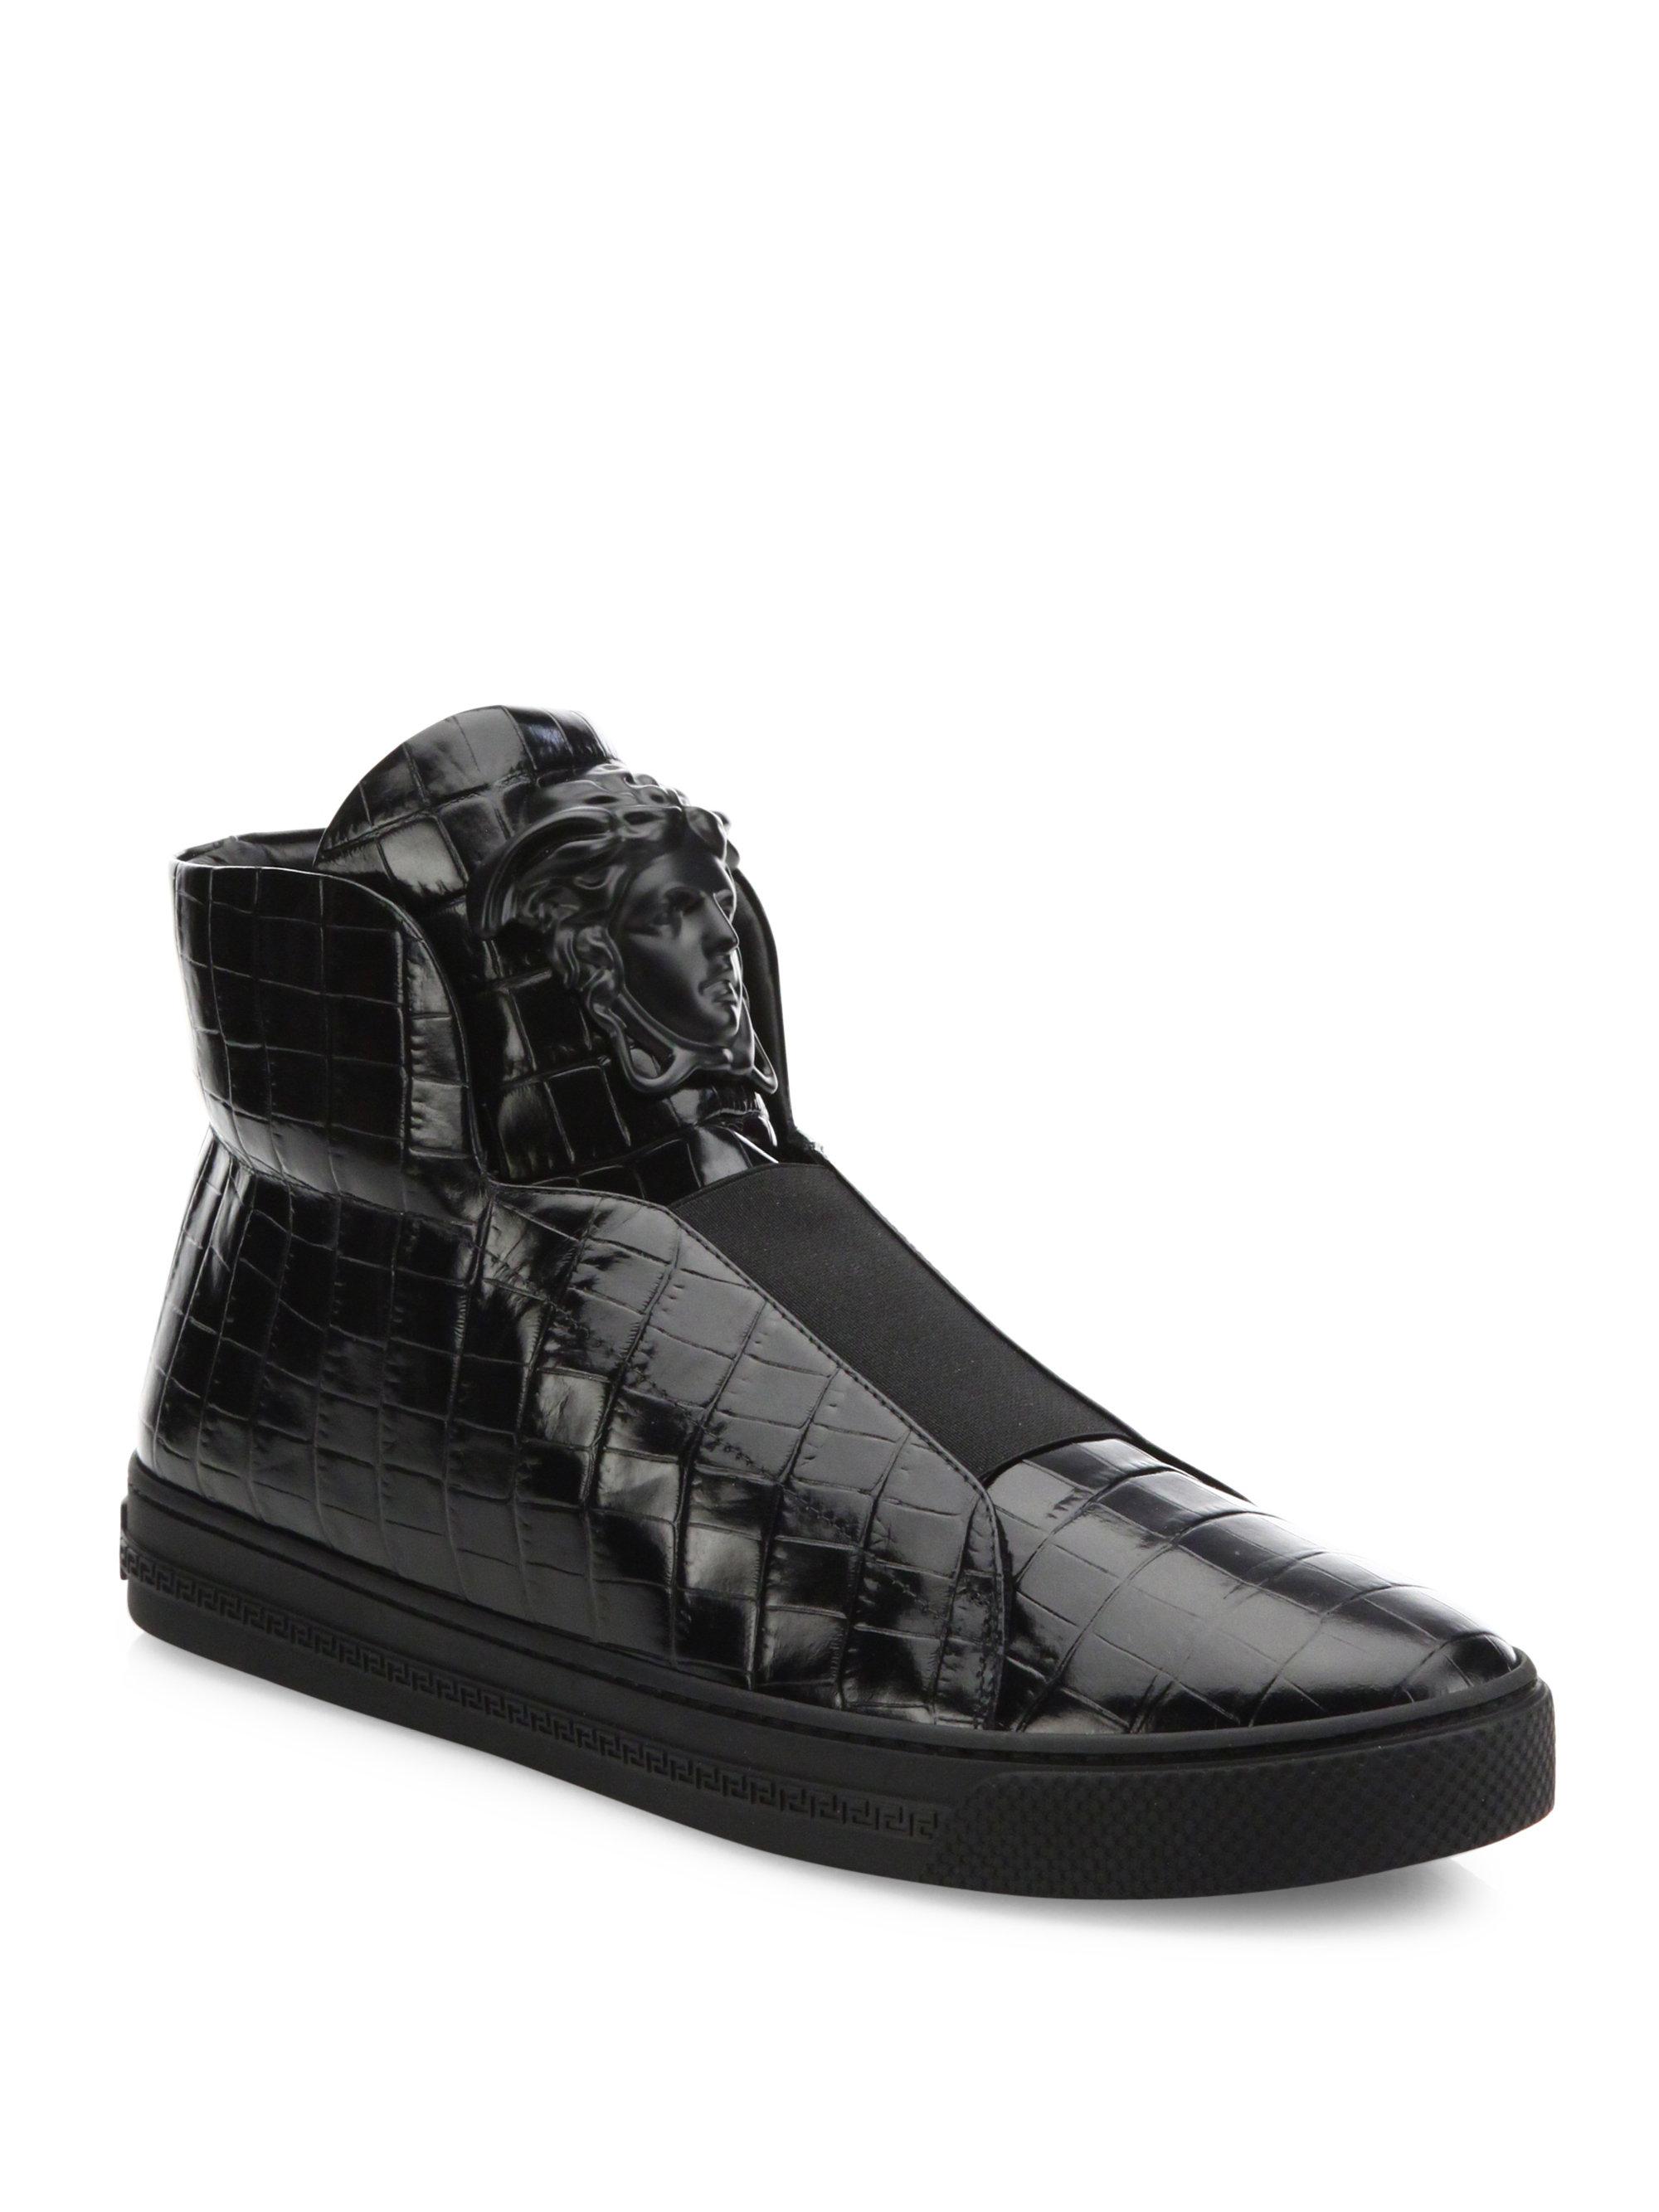 Versace Palazzo Idol Medusa Leather Sneakers in Black for Men - Lyst